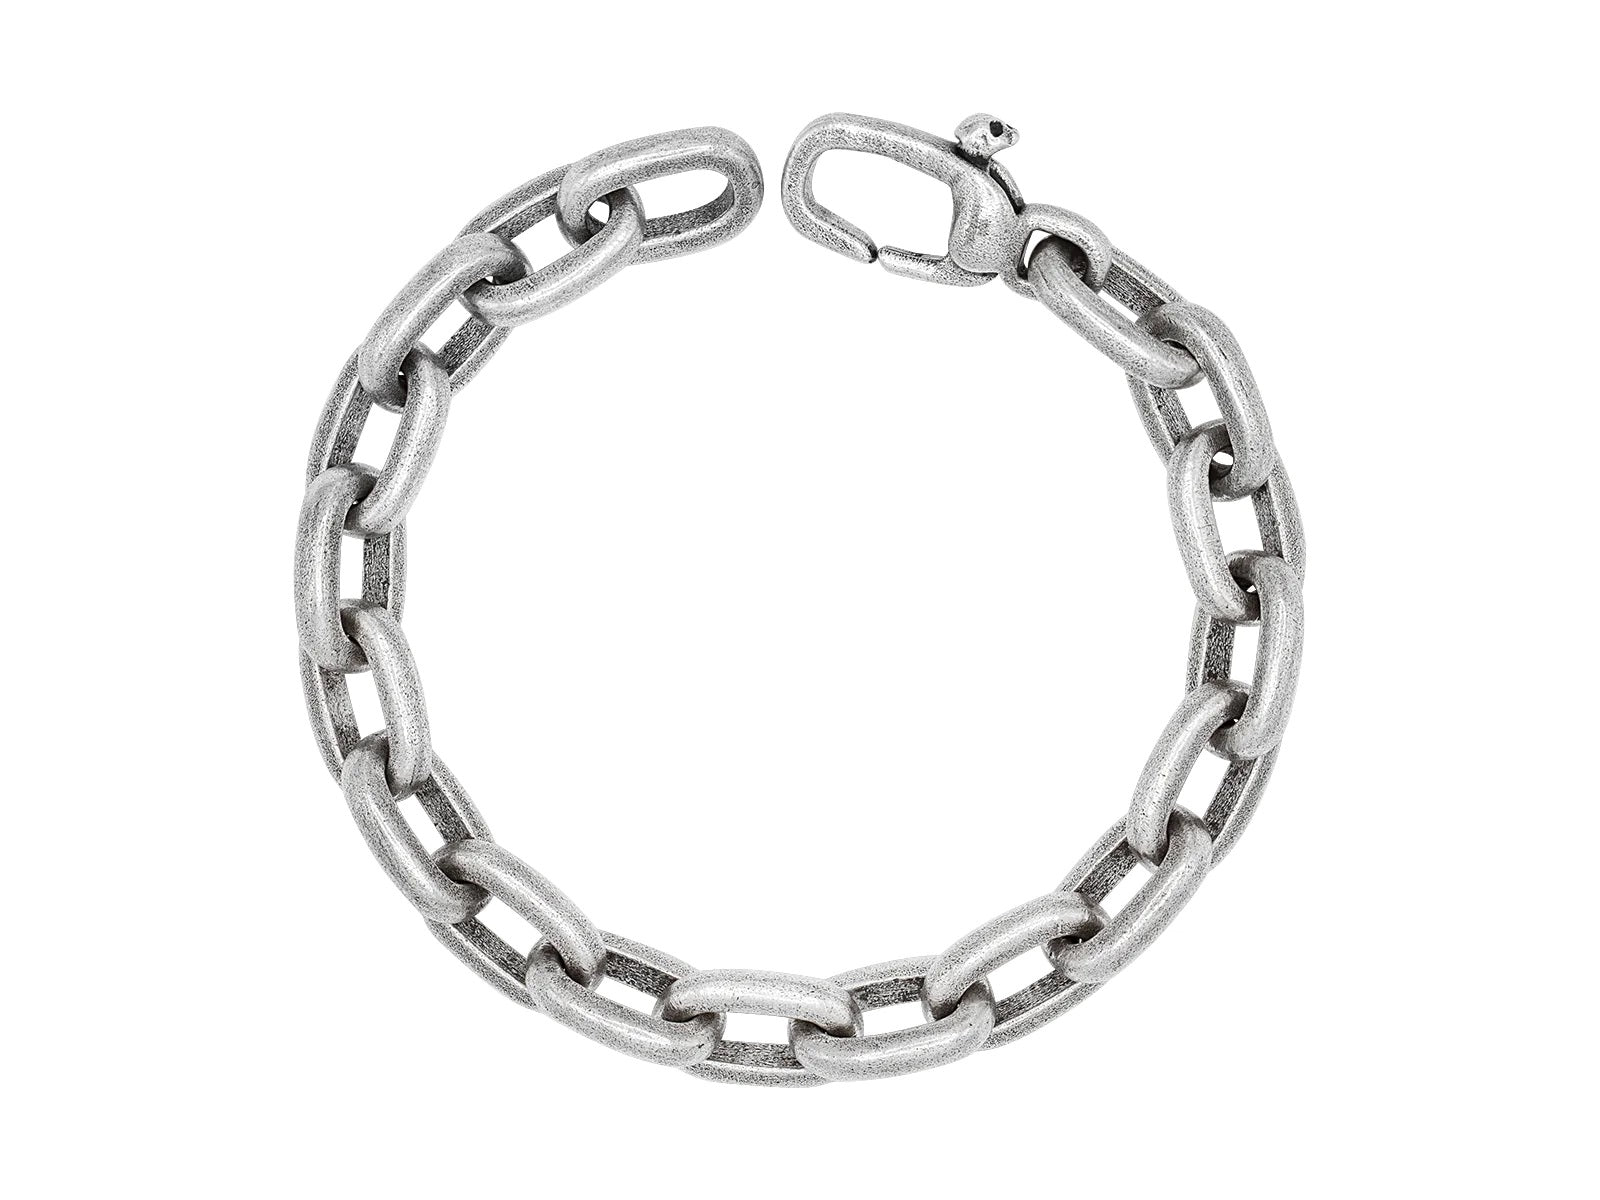 ARTISAN STERLING SILVER CHAIN BRACELET, OVAL LINKS, WITH NO STONE